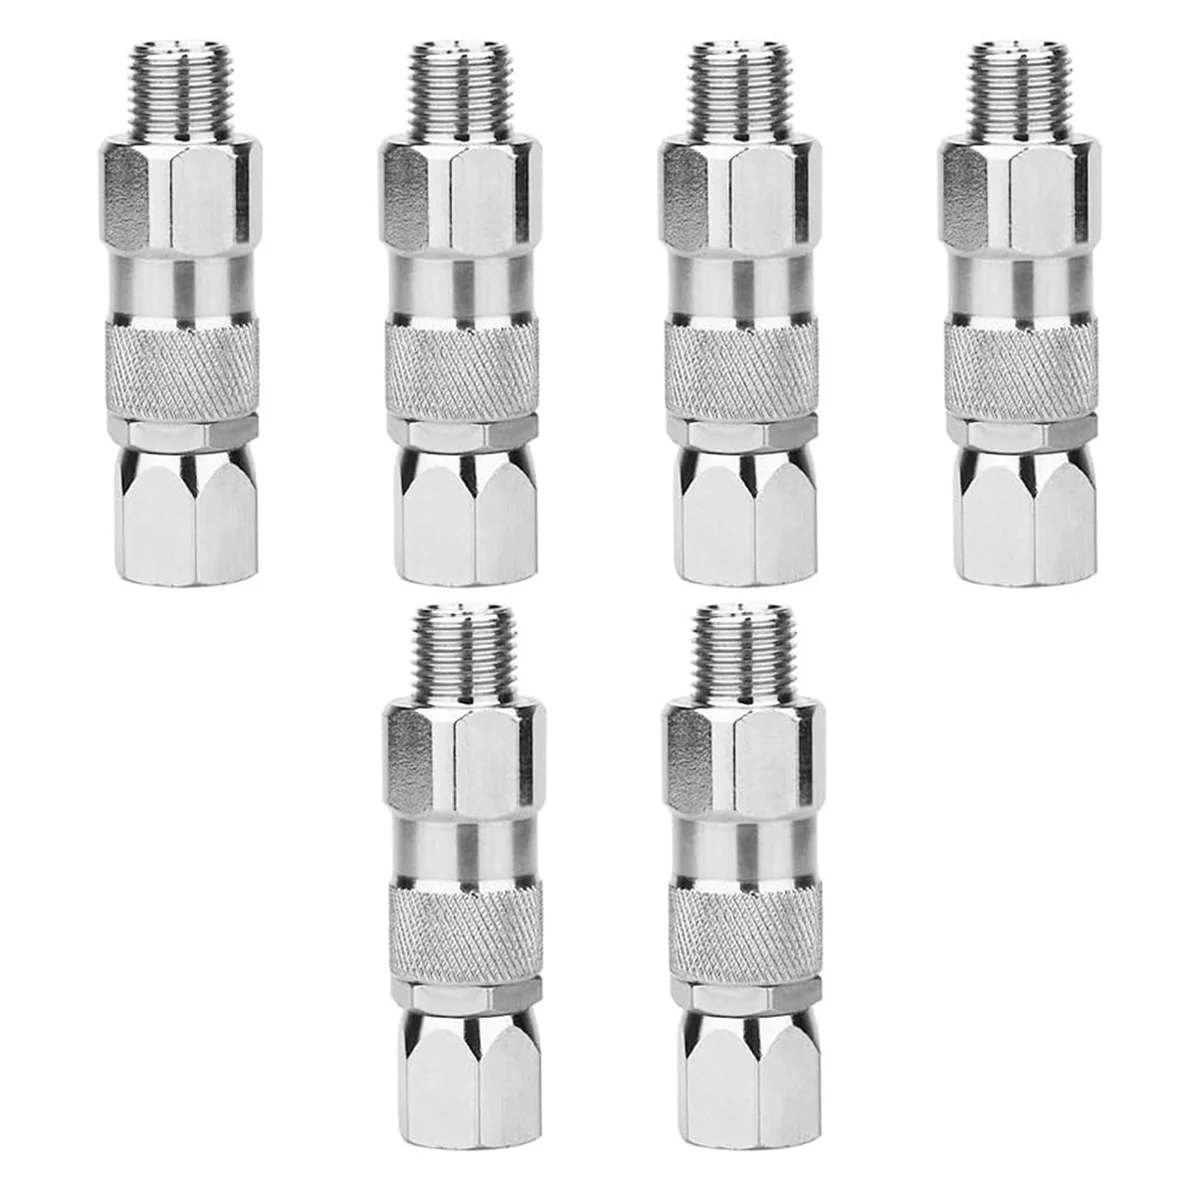 

Airless Spray Swivel Joint 1/4-Inch High Pressure Painting Supplies Airless Spray Whip Hose Swive(6Pack)